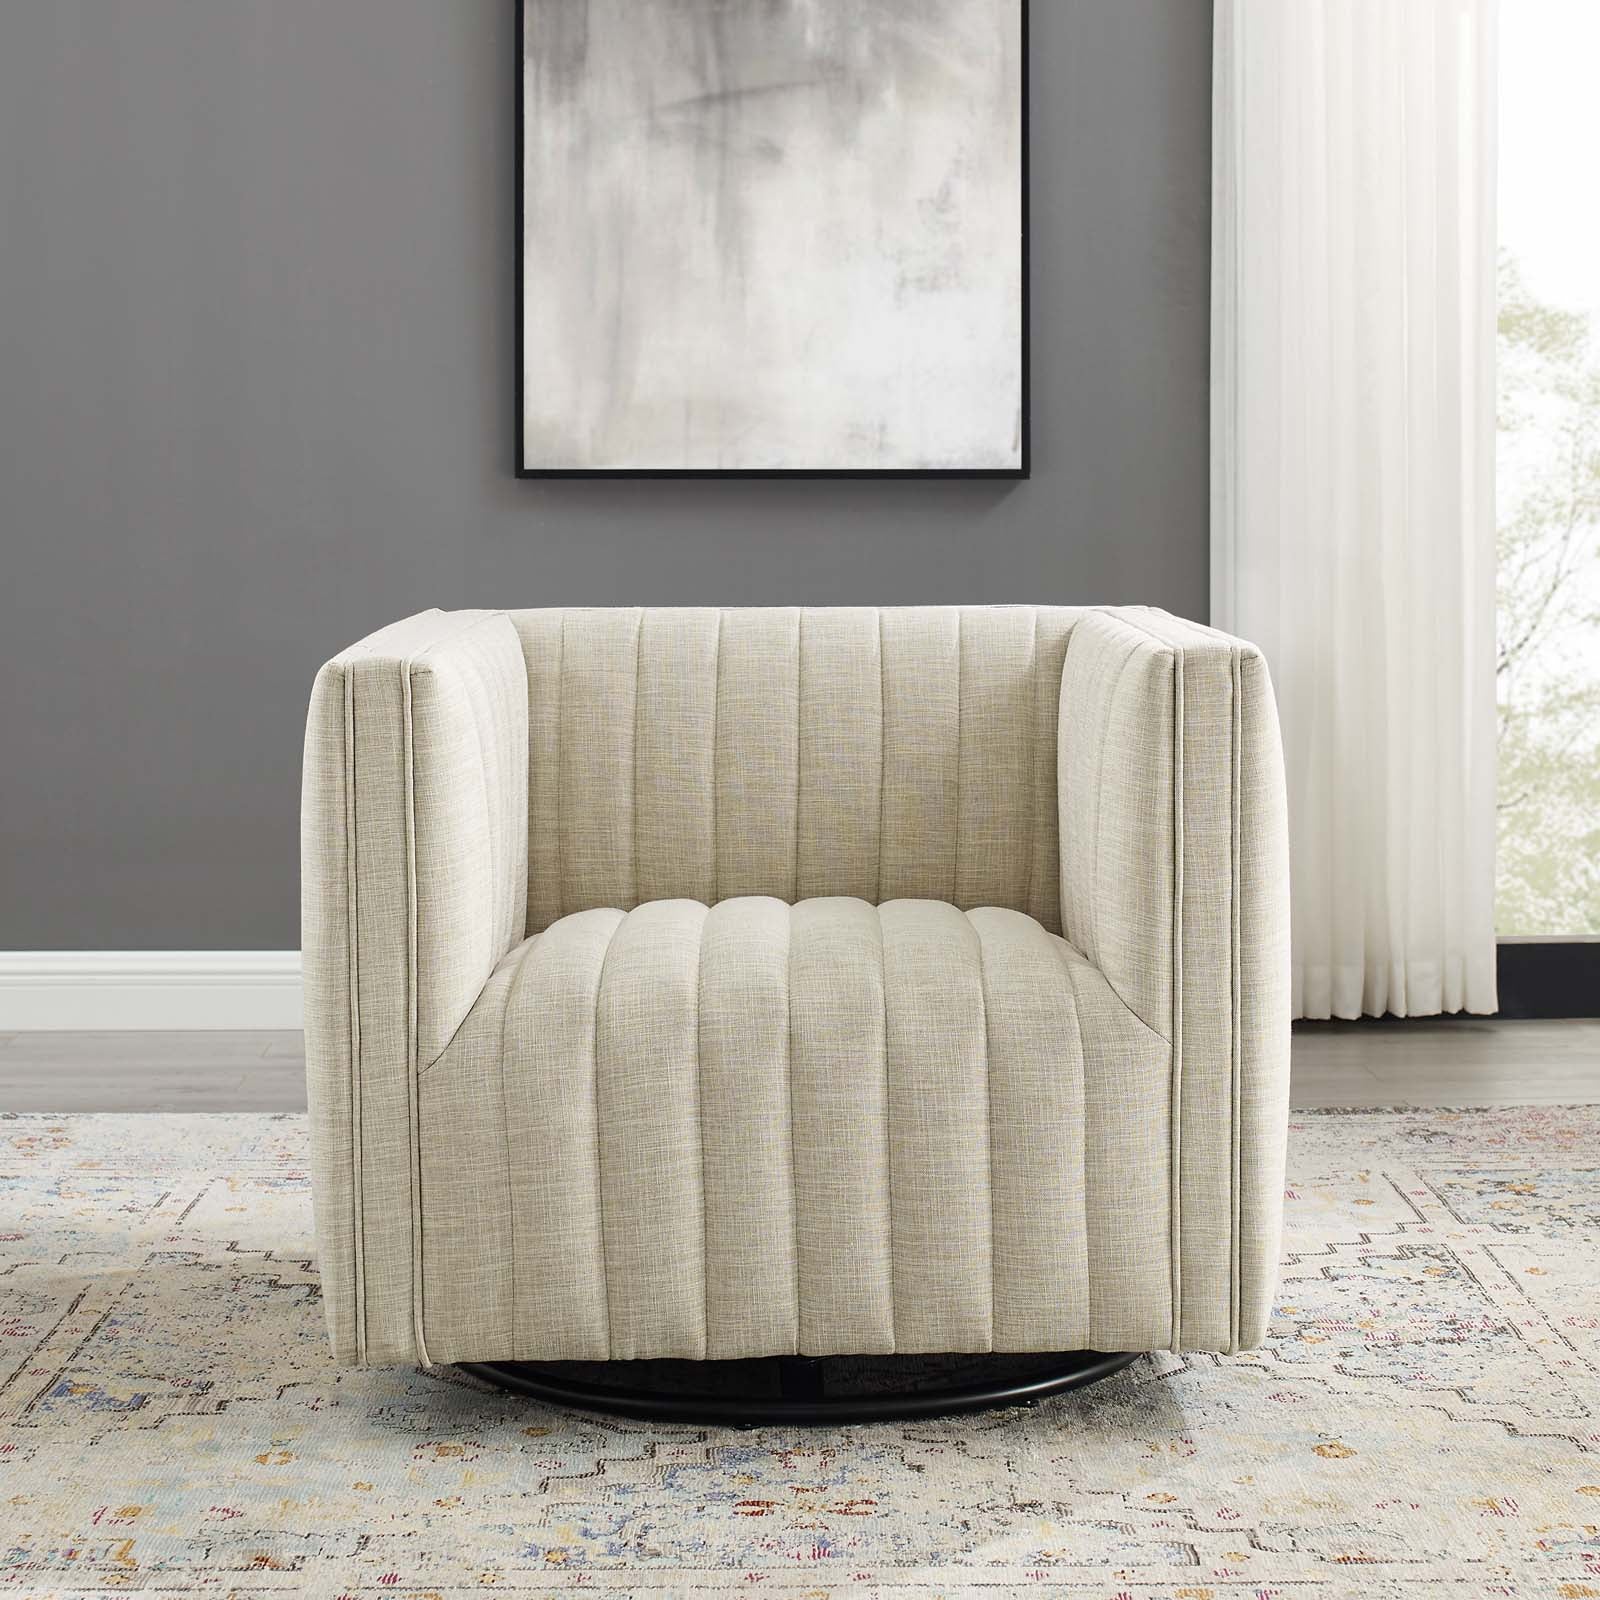 Modway Accent Chairs - Conjure Tufted Swivel Upholstered Armchair Beige